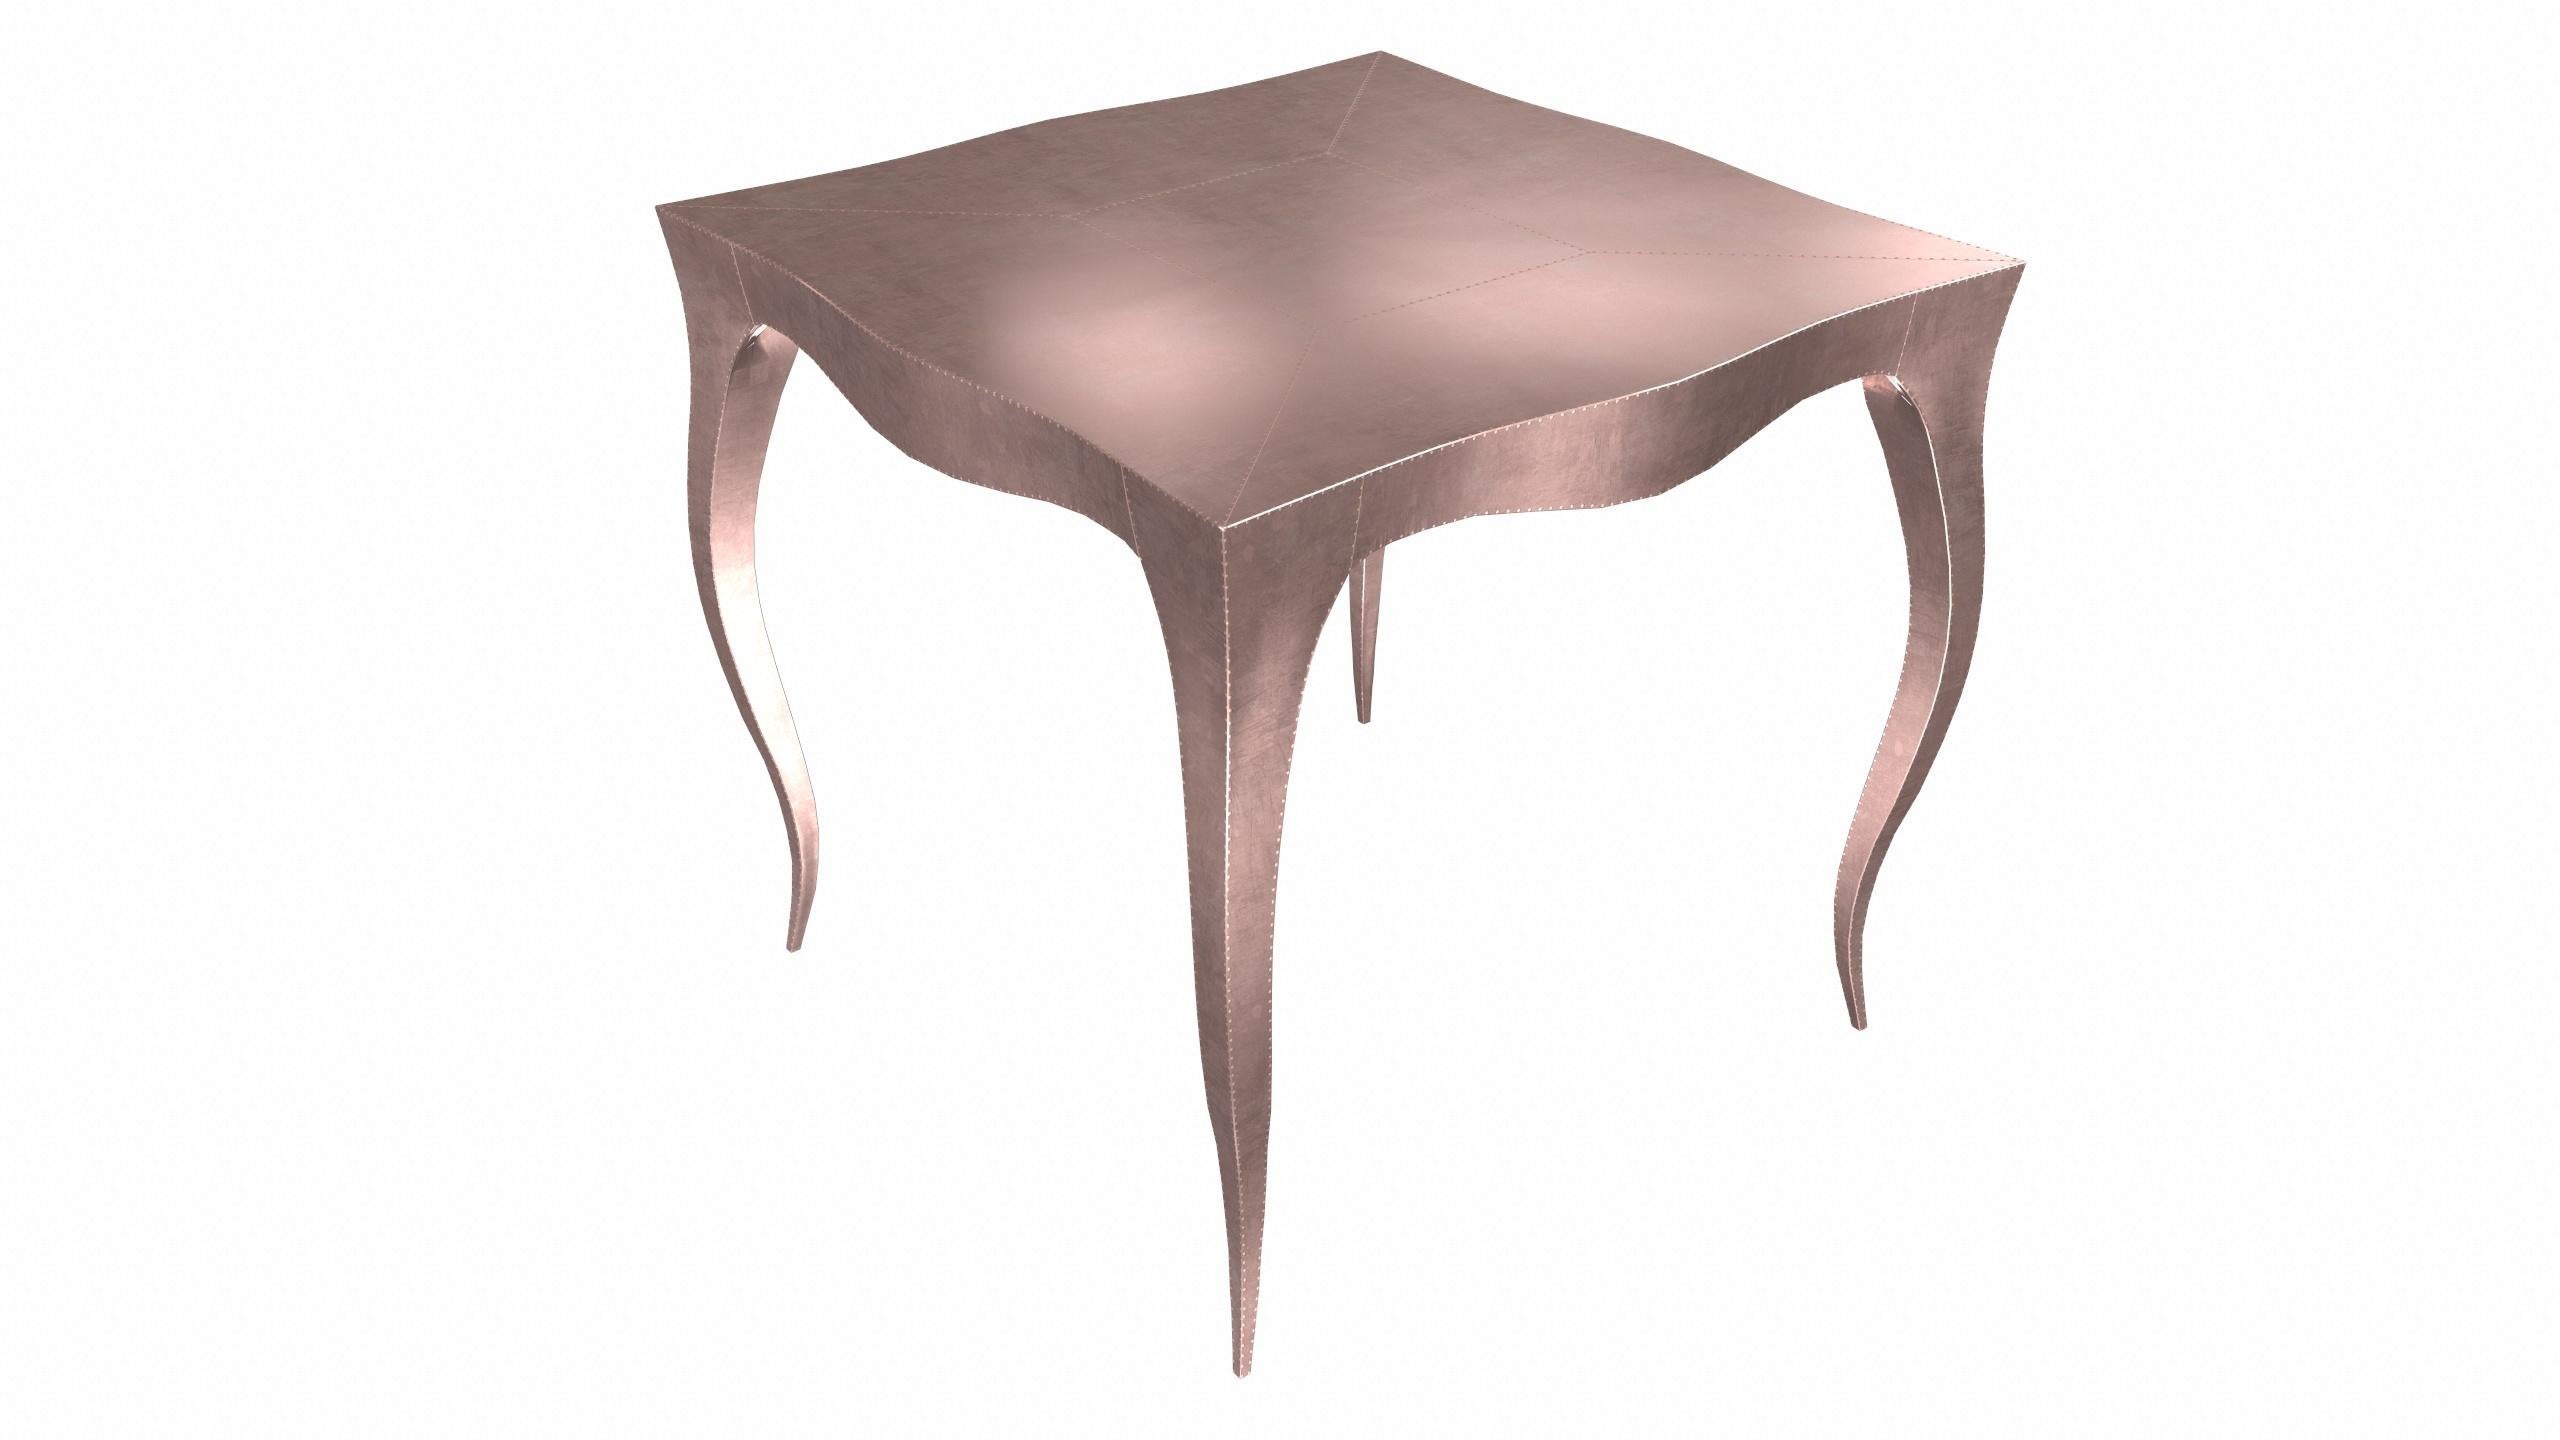 Metal Louise Art Nouveau Vanities Tables Smooth Copper by Paul Mathieu for S. Odegard For Sale